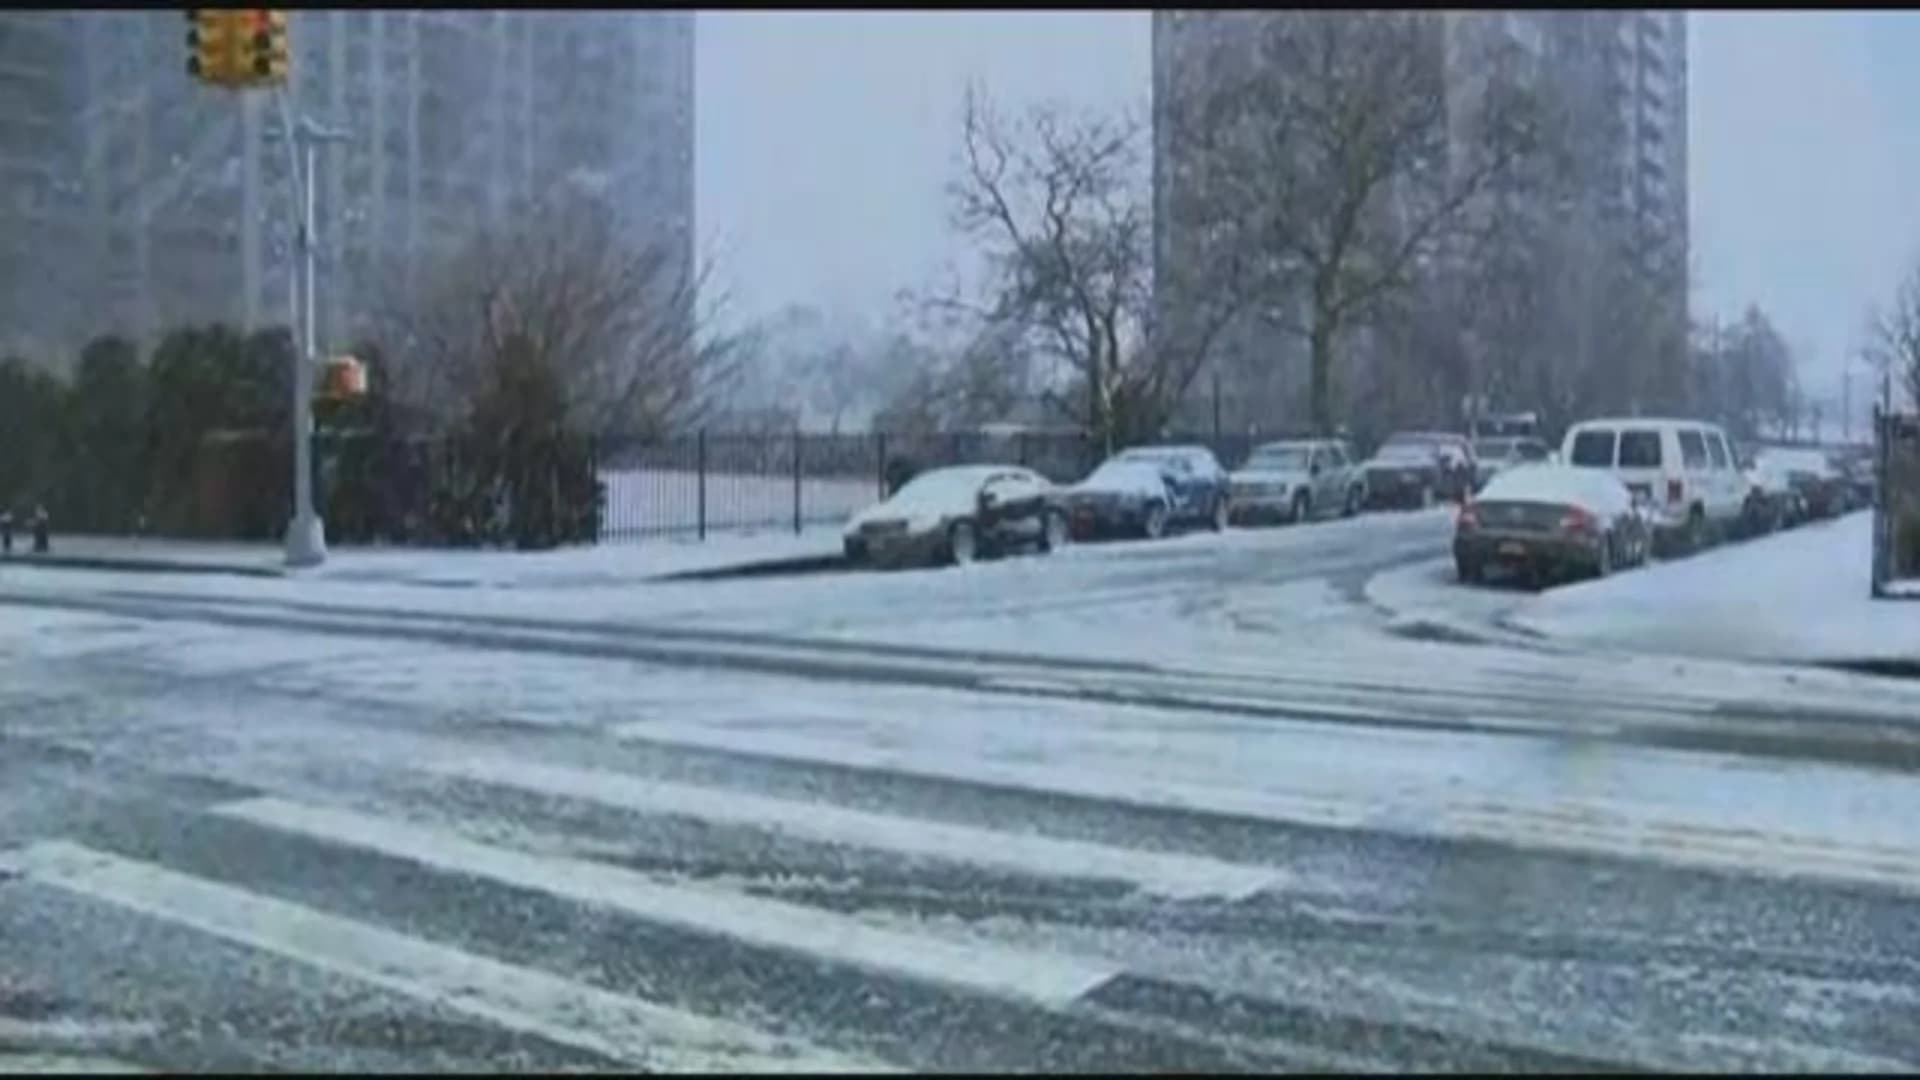 Rush hour roads pose dangers to drivers during nor'easter